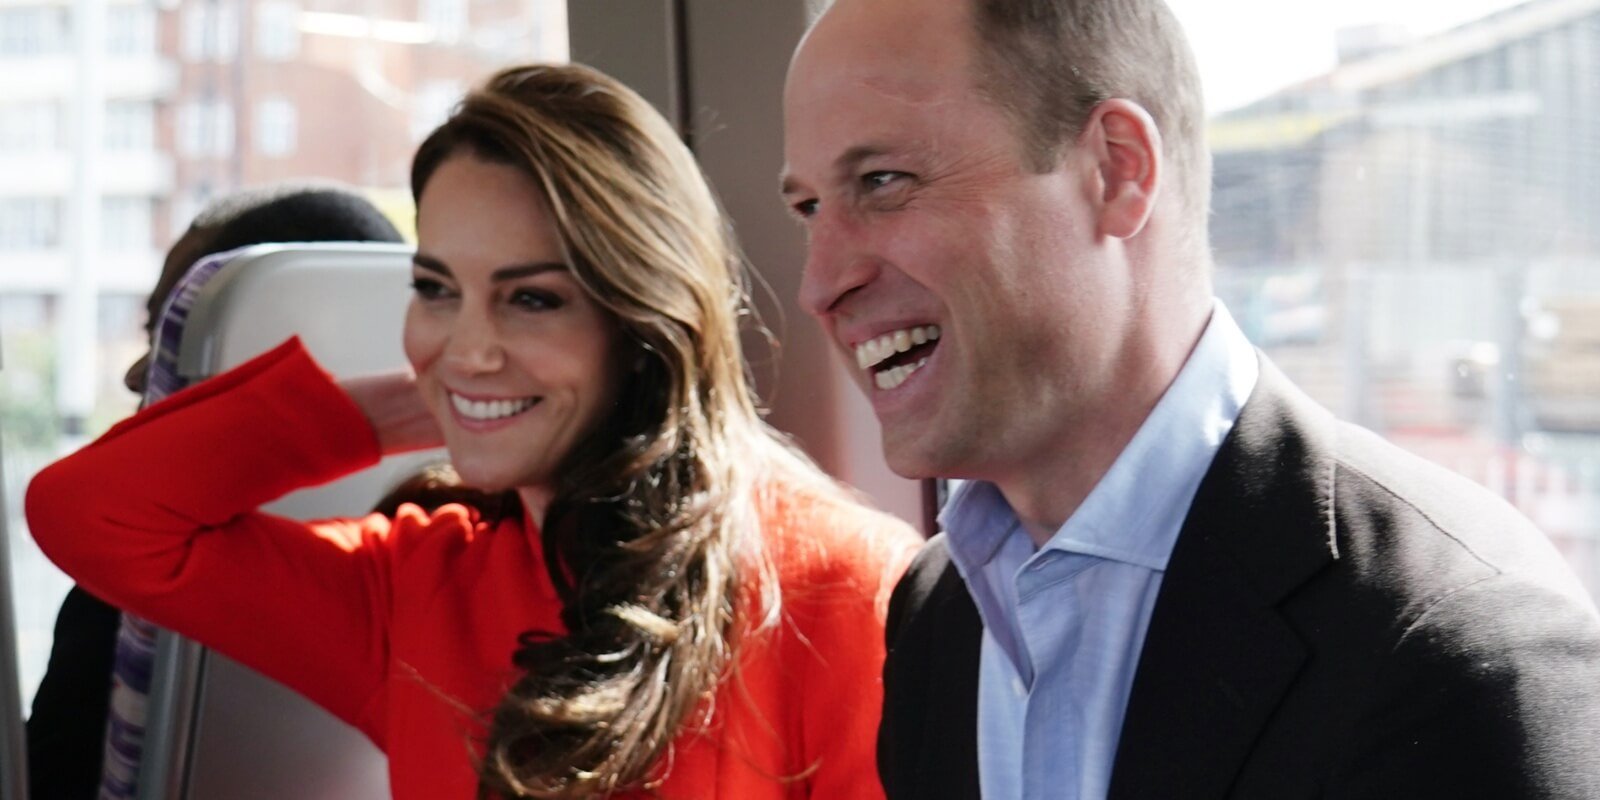 Kate Middleton and Prince William smile for the cameras while visiting the the Dog & Duck pub in London.